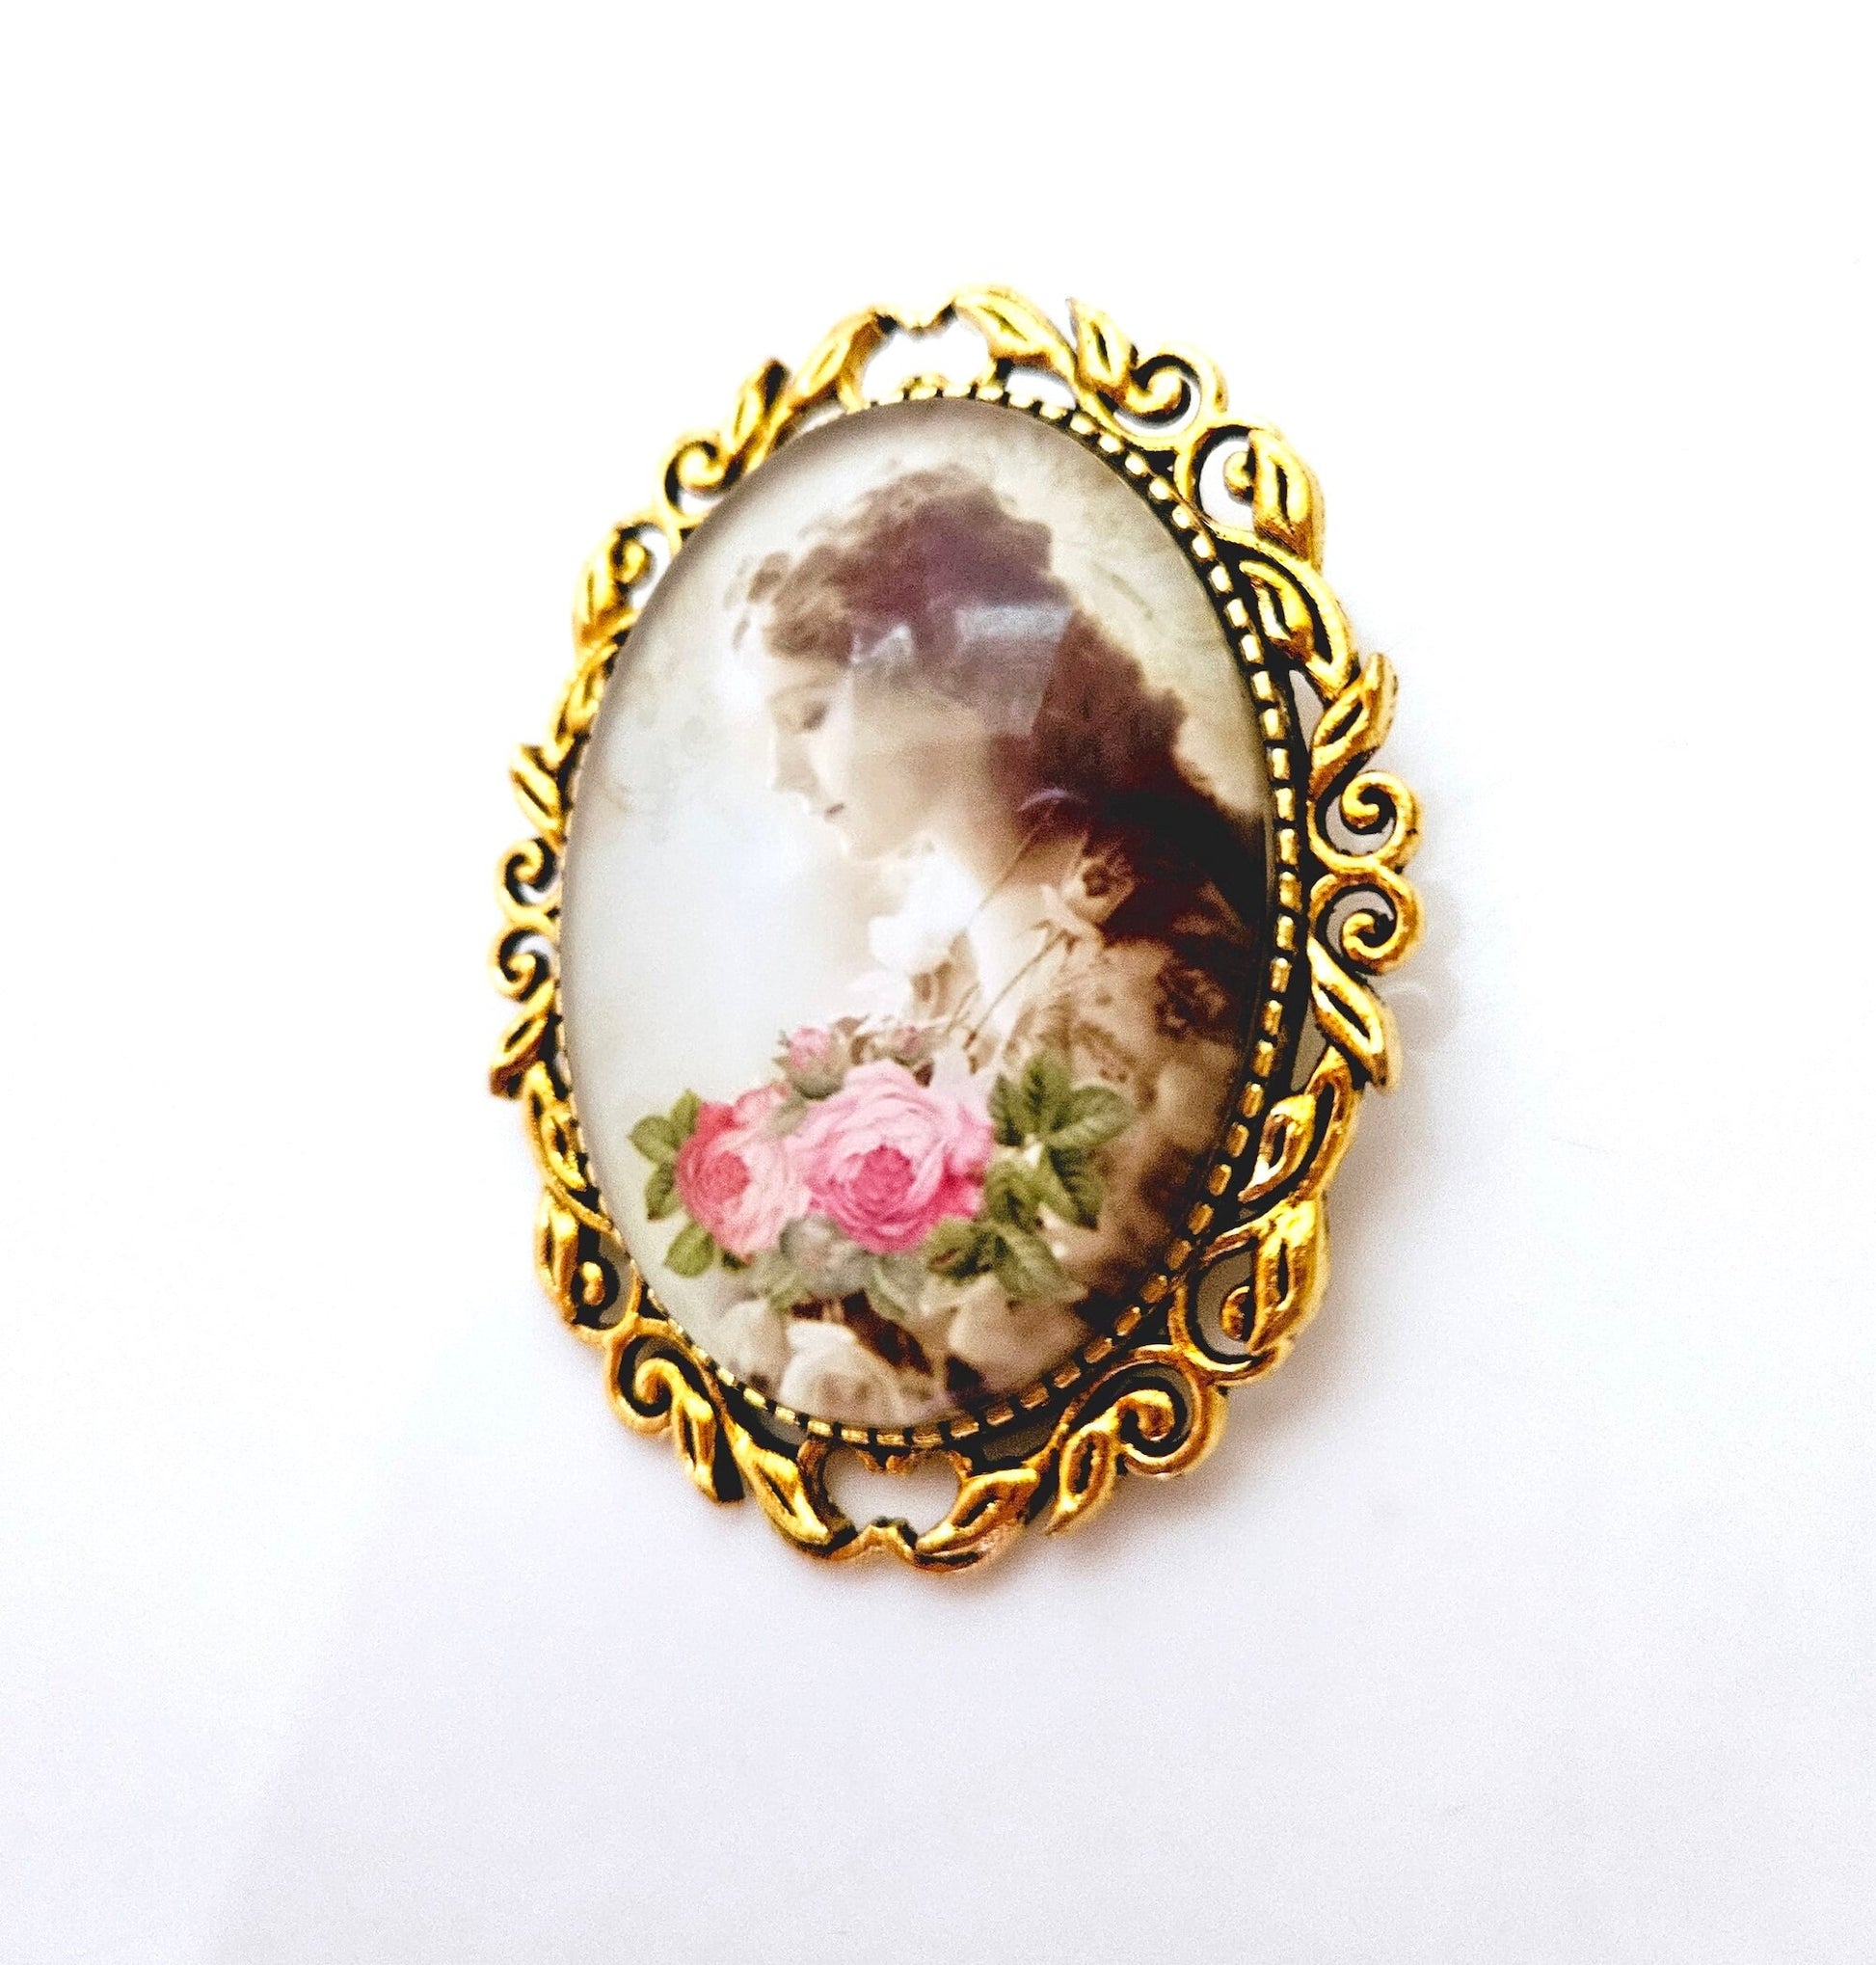 Vintage Style Cameo Brooch, Victorian Lady Portrait Brooch, Gold Plated, Lady With Flowers Pin, Stylish Cameo Pin, Brooches For Women